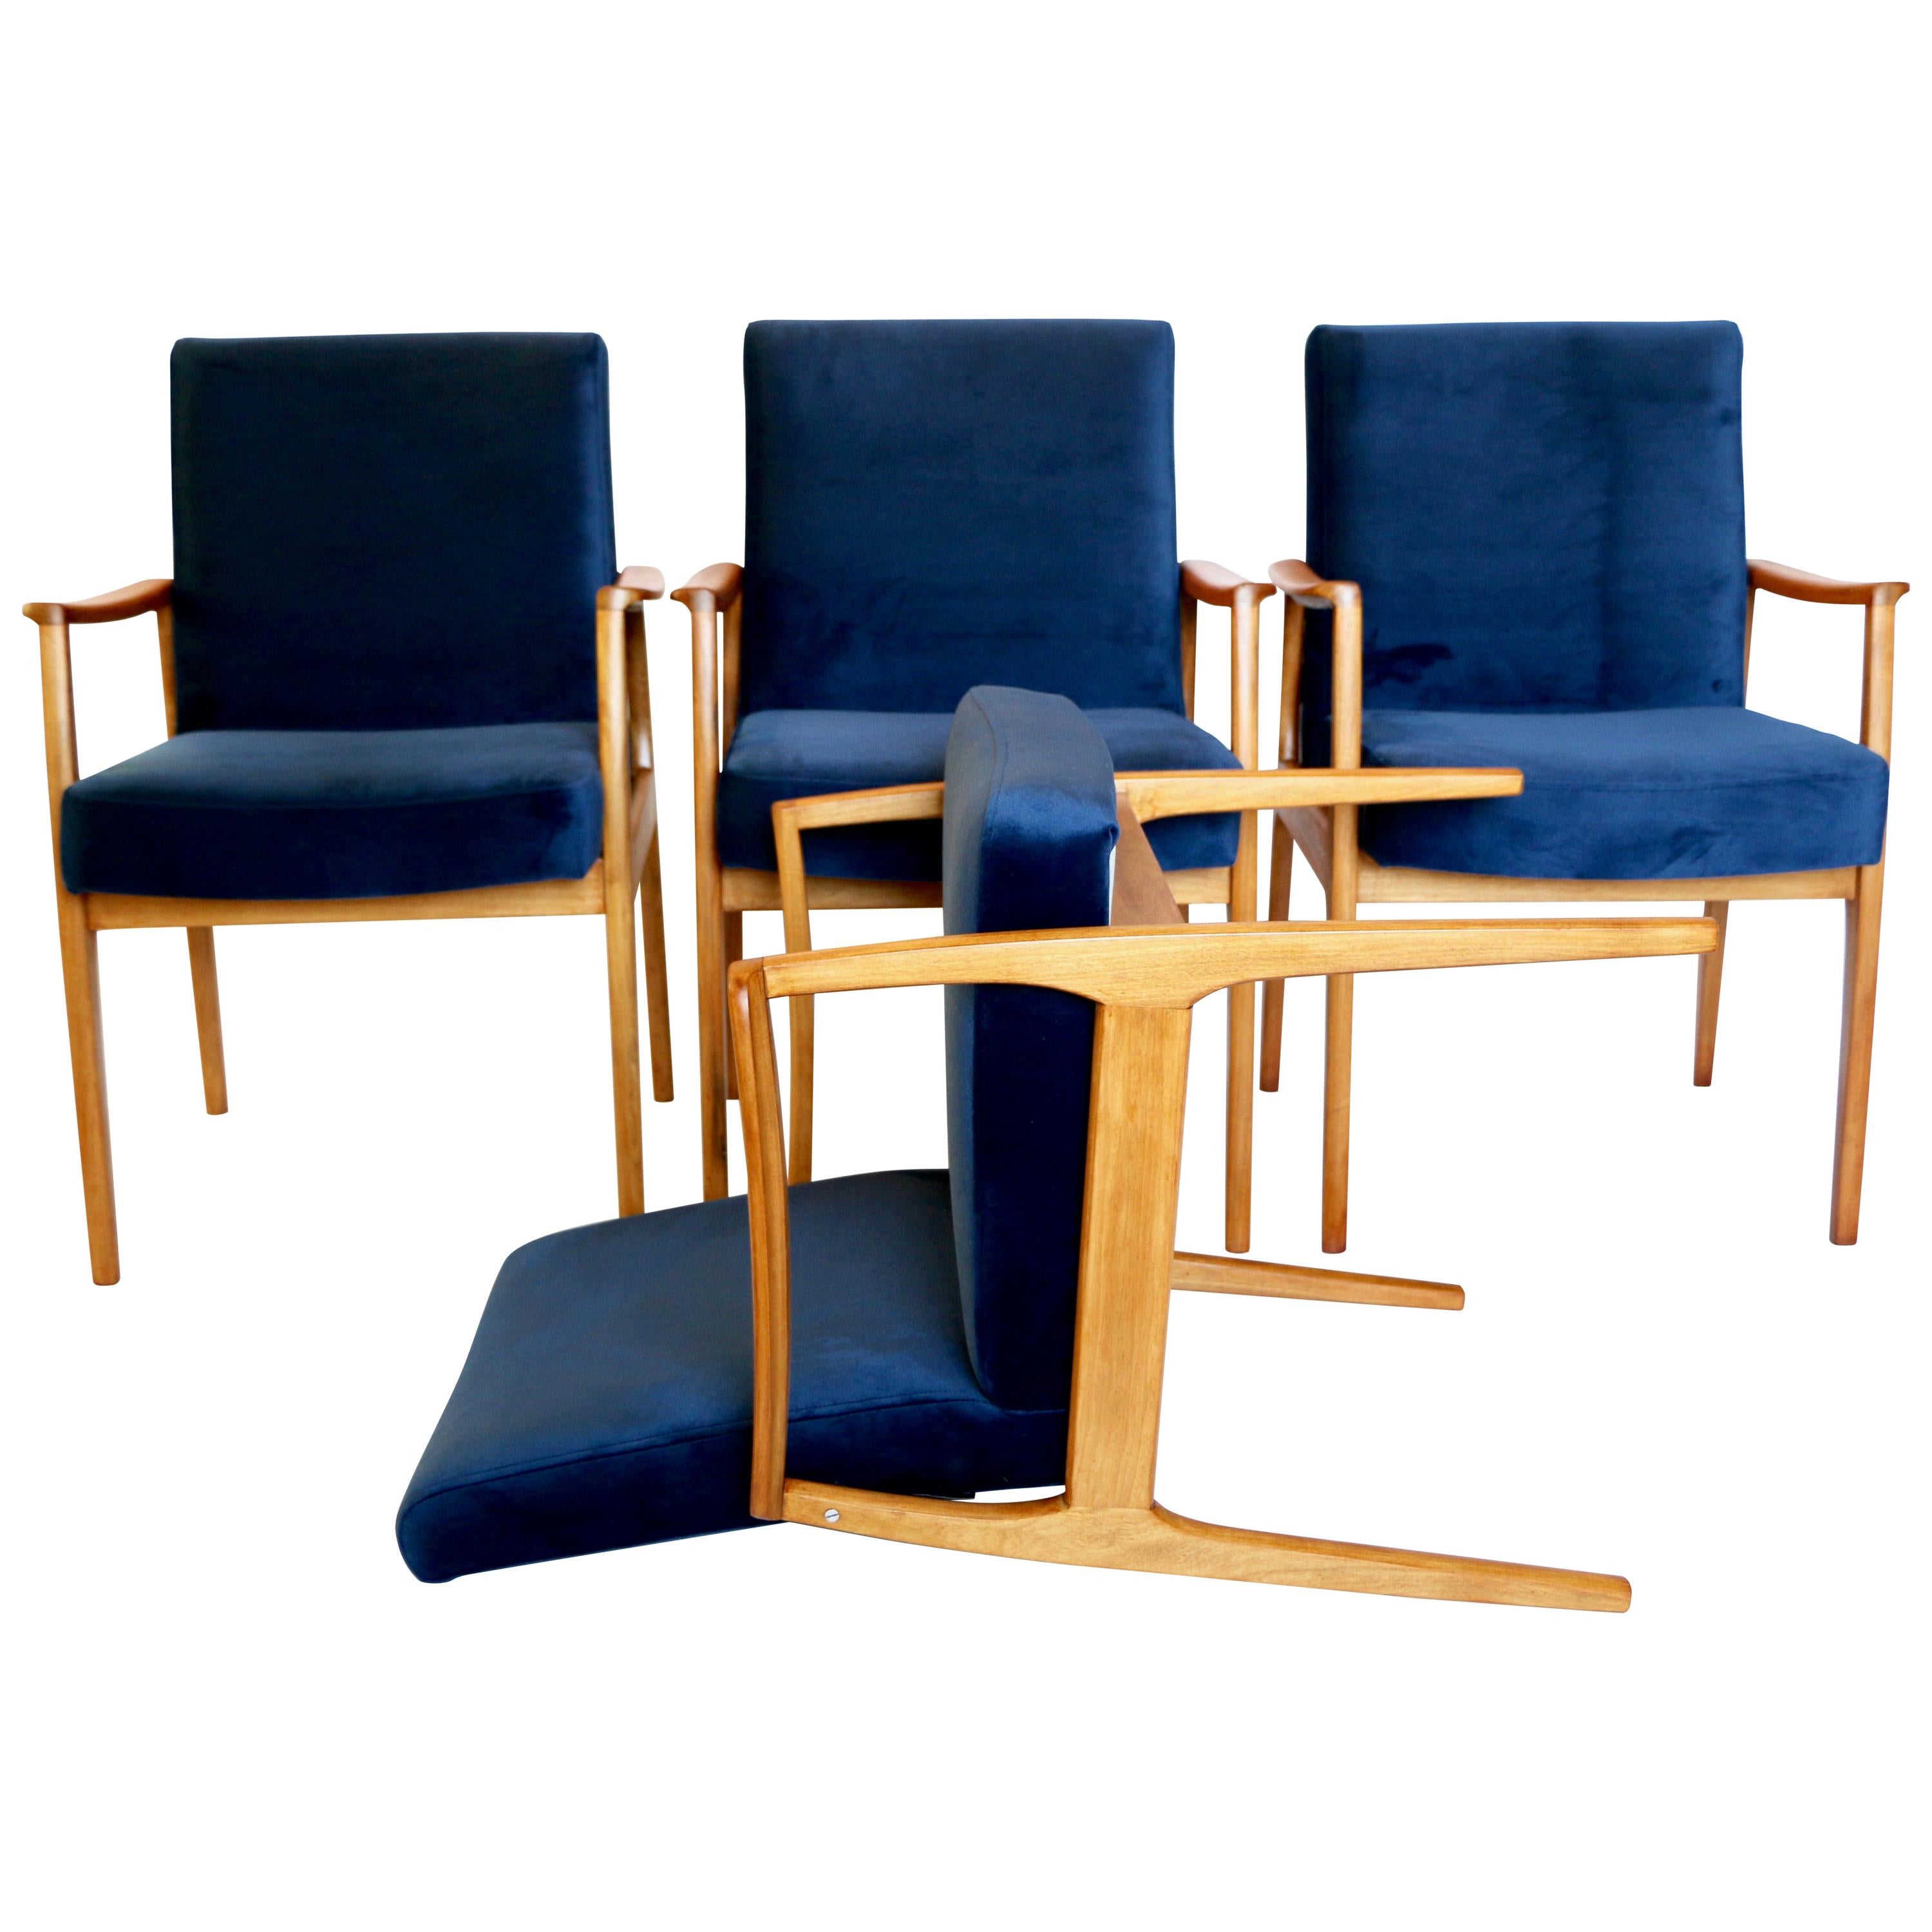 Set of 4 Chairs in Blue Velvet from 20th Century